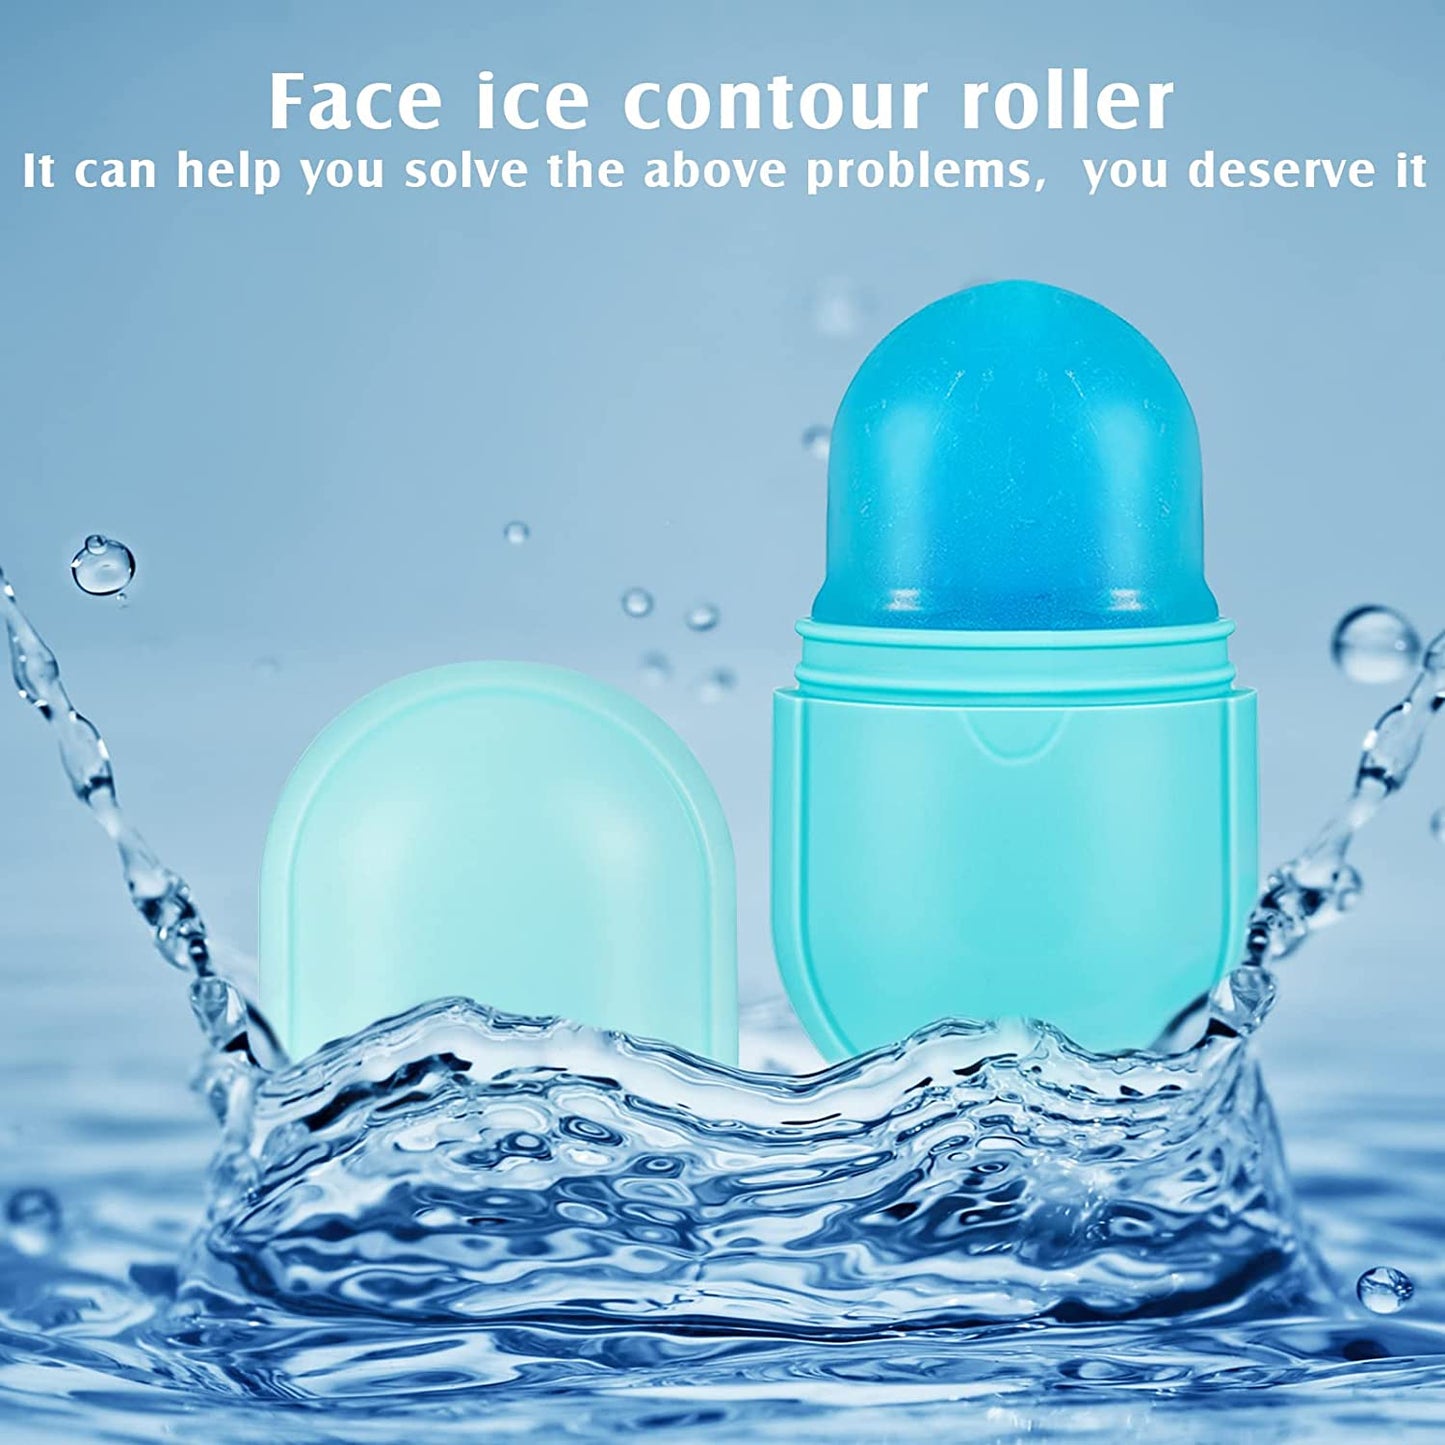 Ice Face Roller Beauty Ice Facial Roller for Face Skin Care Silicone Ice Stick Face Ice Mould Icing Tool Shrink Pore Ice Sphere for Brighten Lubricate Remove Fine Lines (Purple,2.6 x 2.1 x 4.9 Inch)